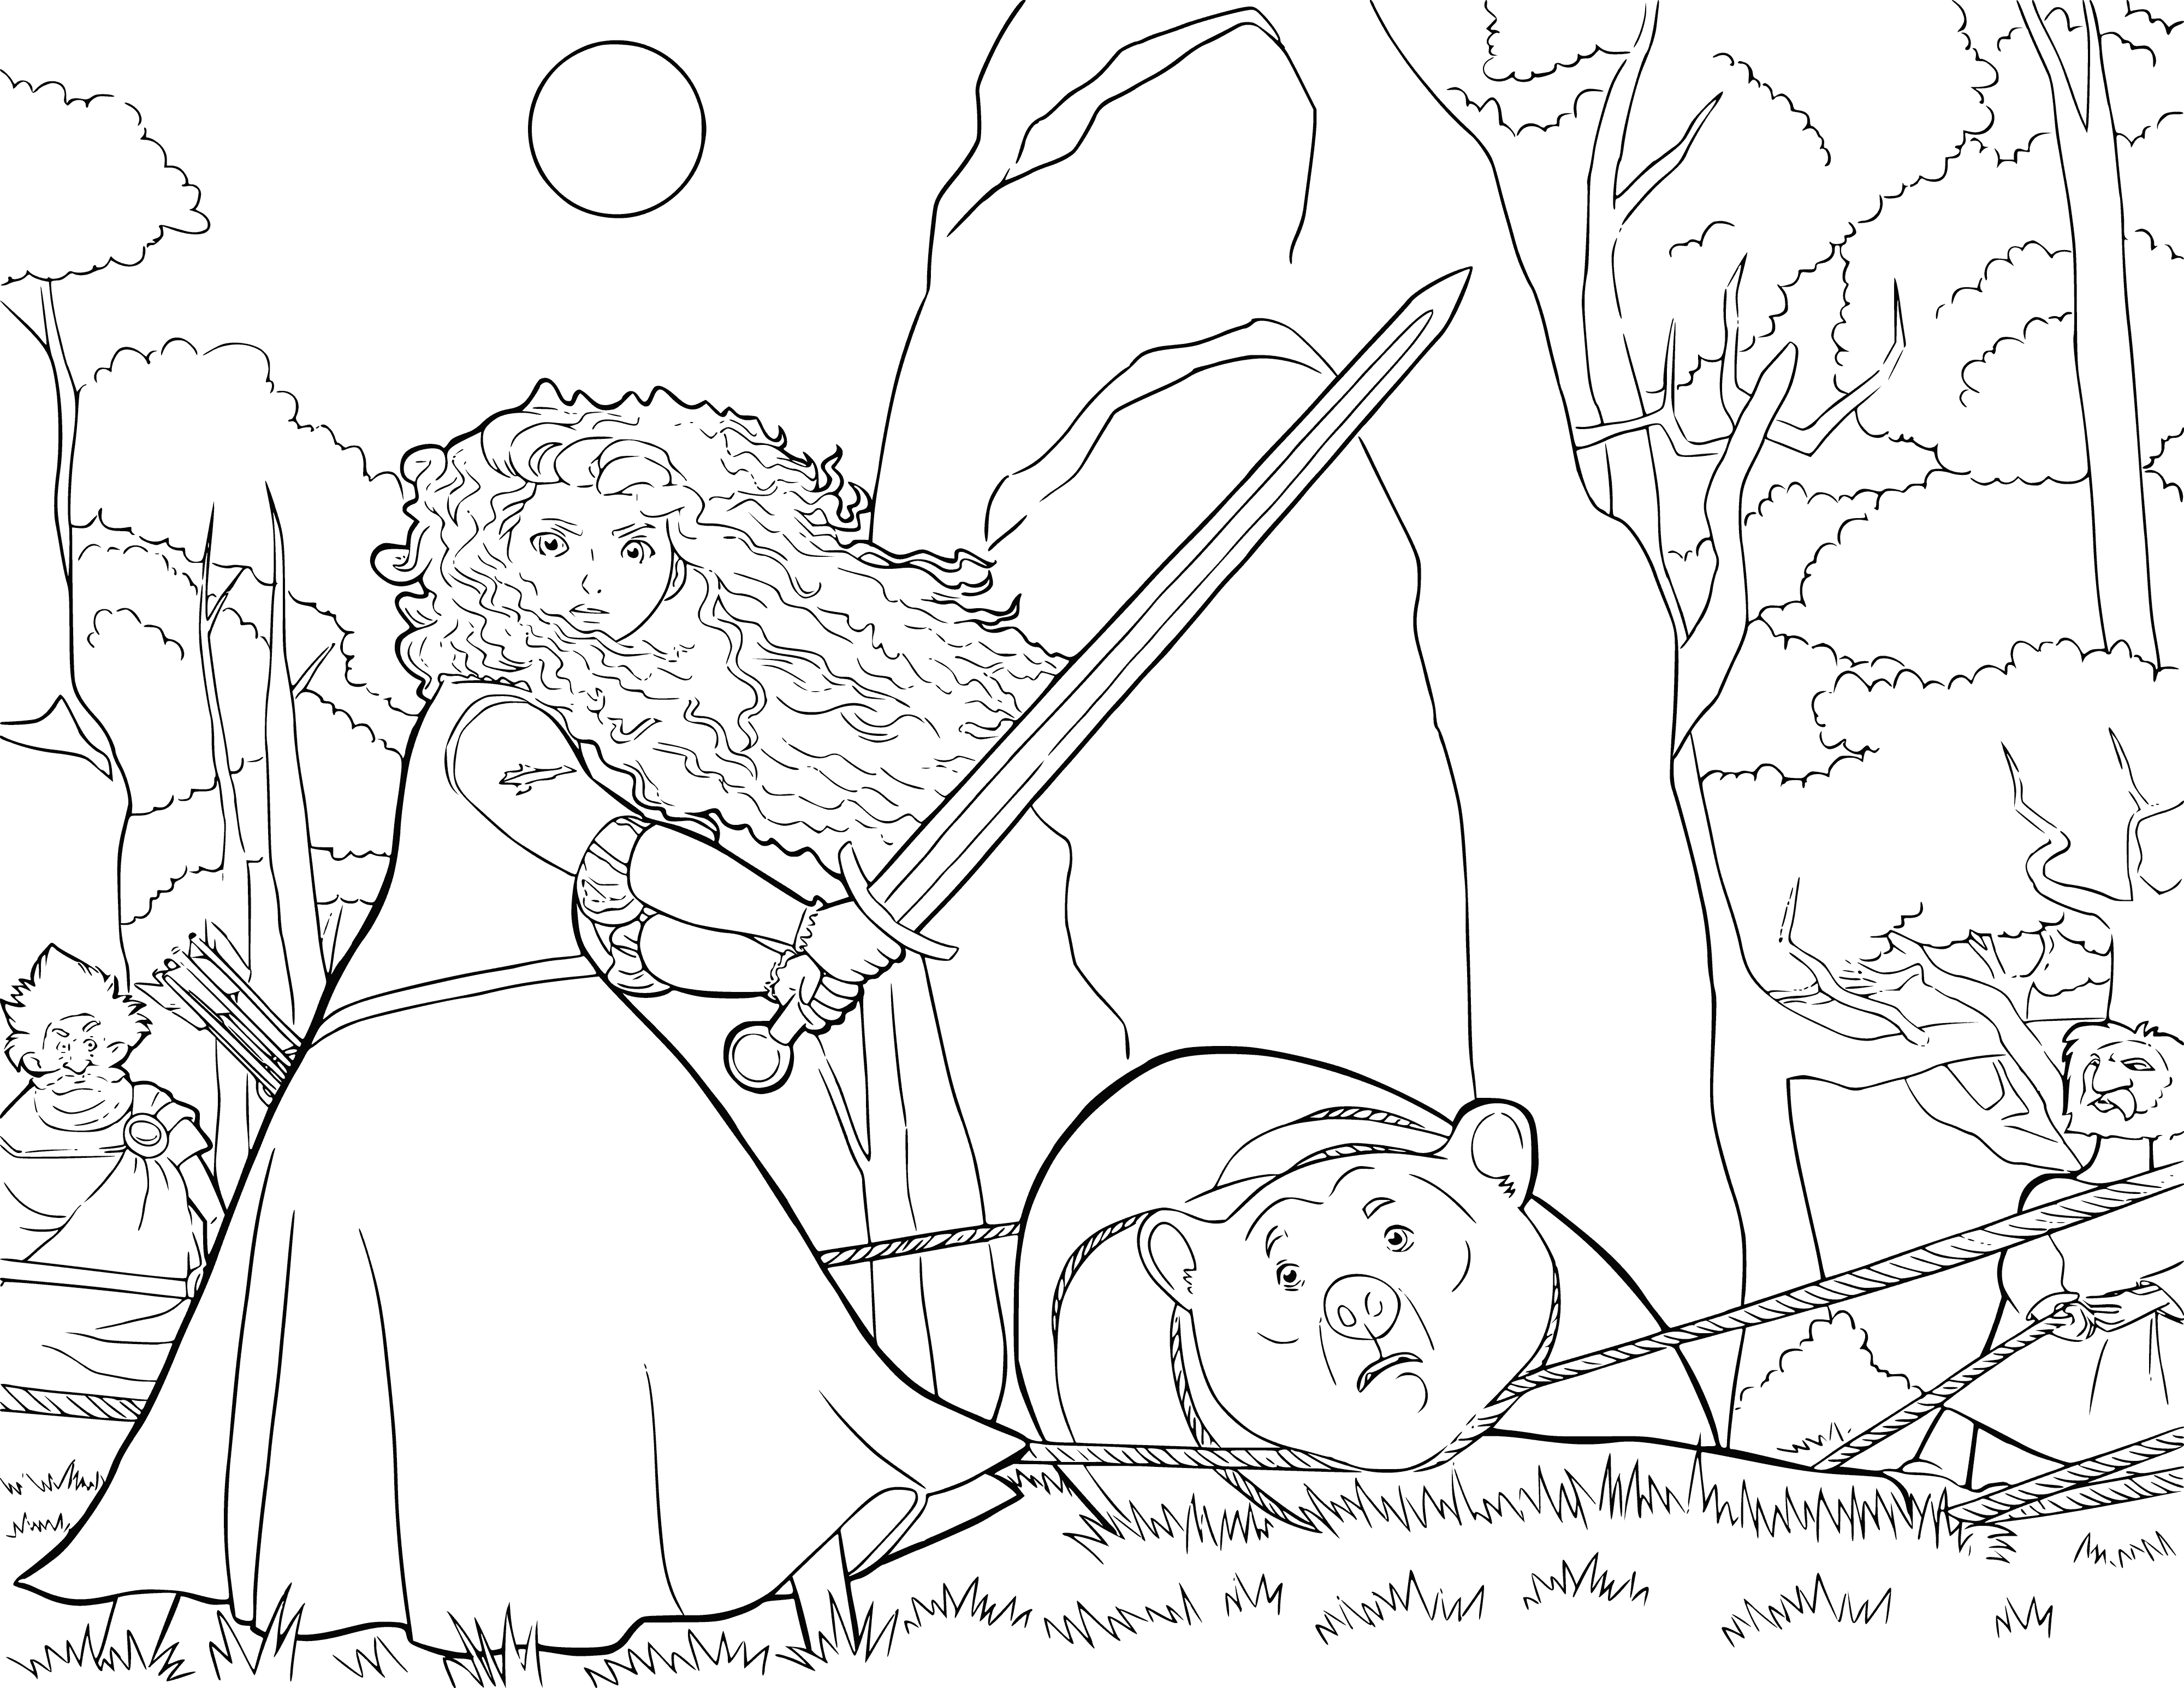 Merida saves her mother coloring page